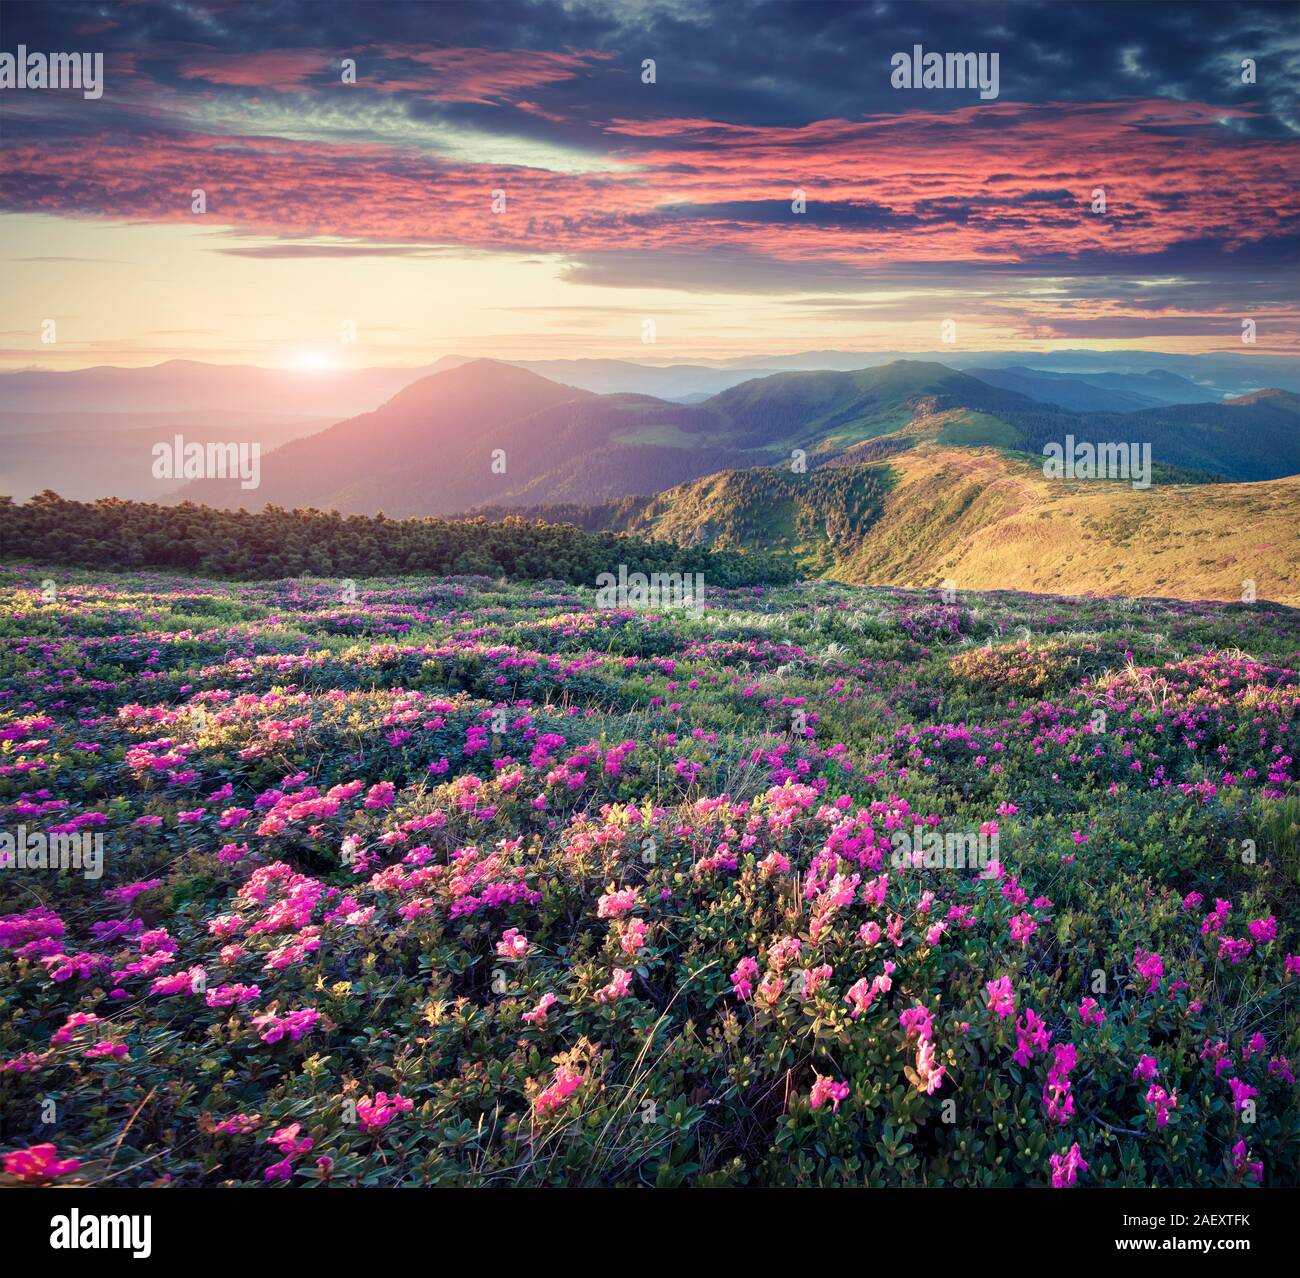 Blossom carpet of pink rhododendron flowers in the mountains at sunrise, Retro style. Stock Photo